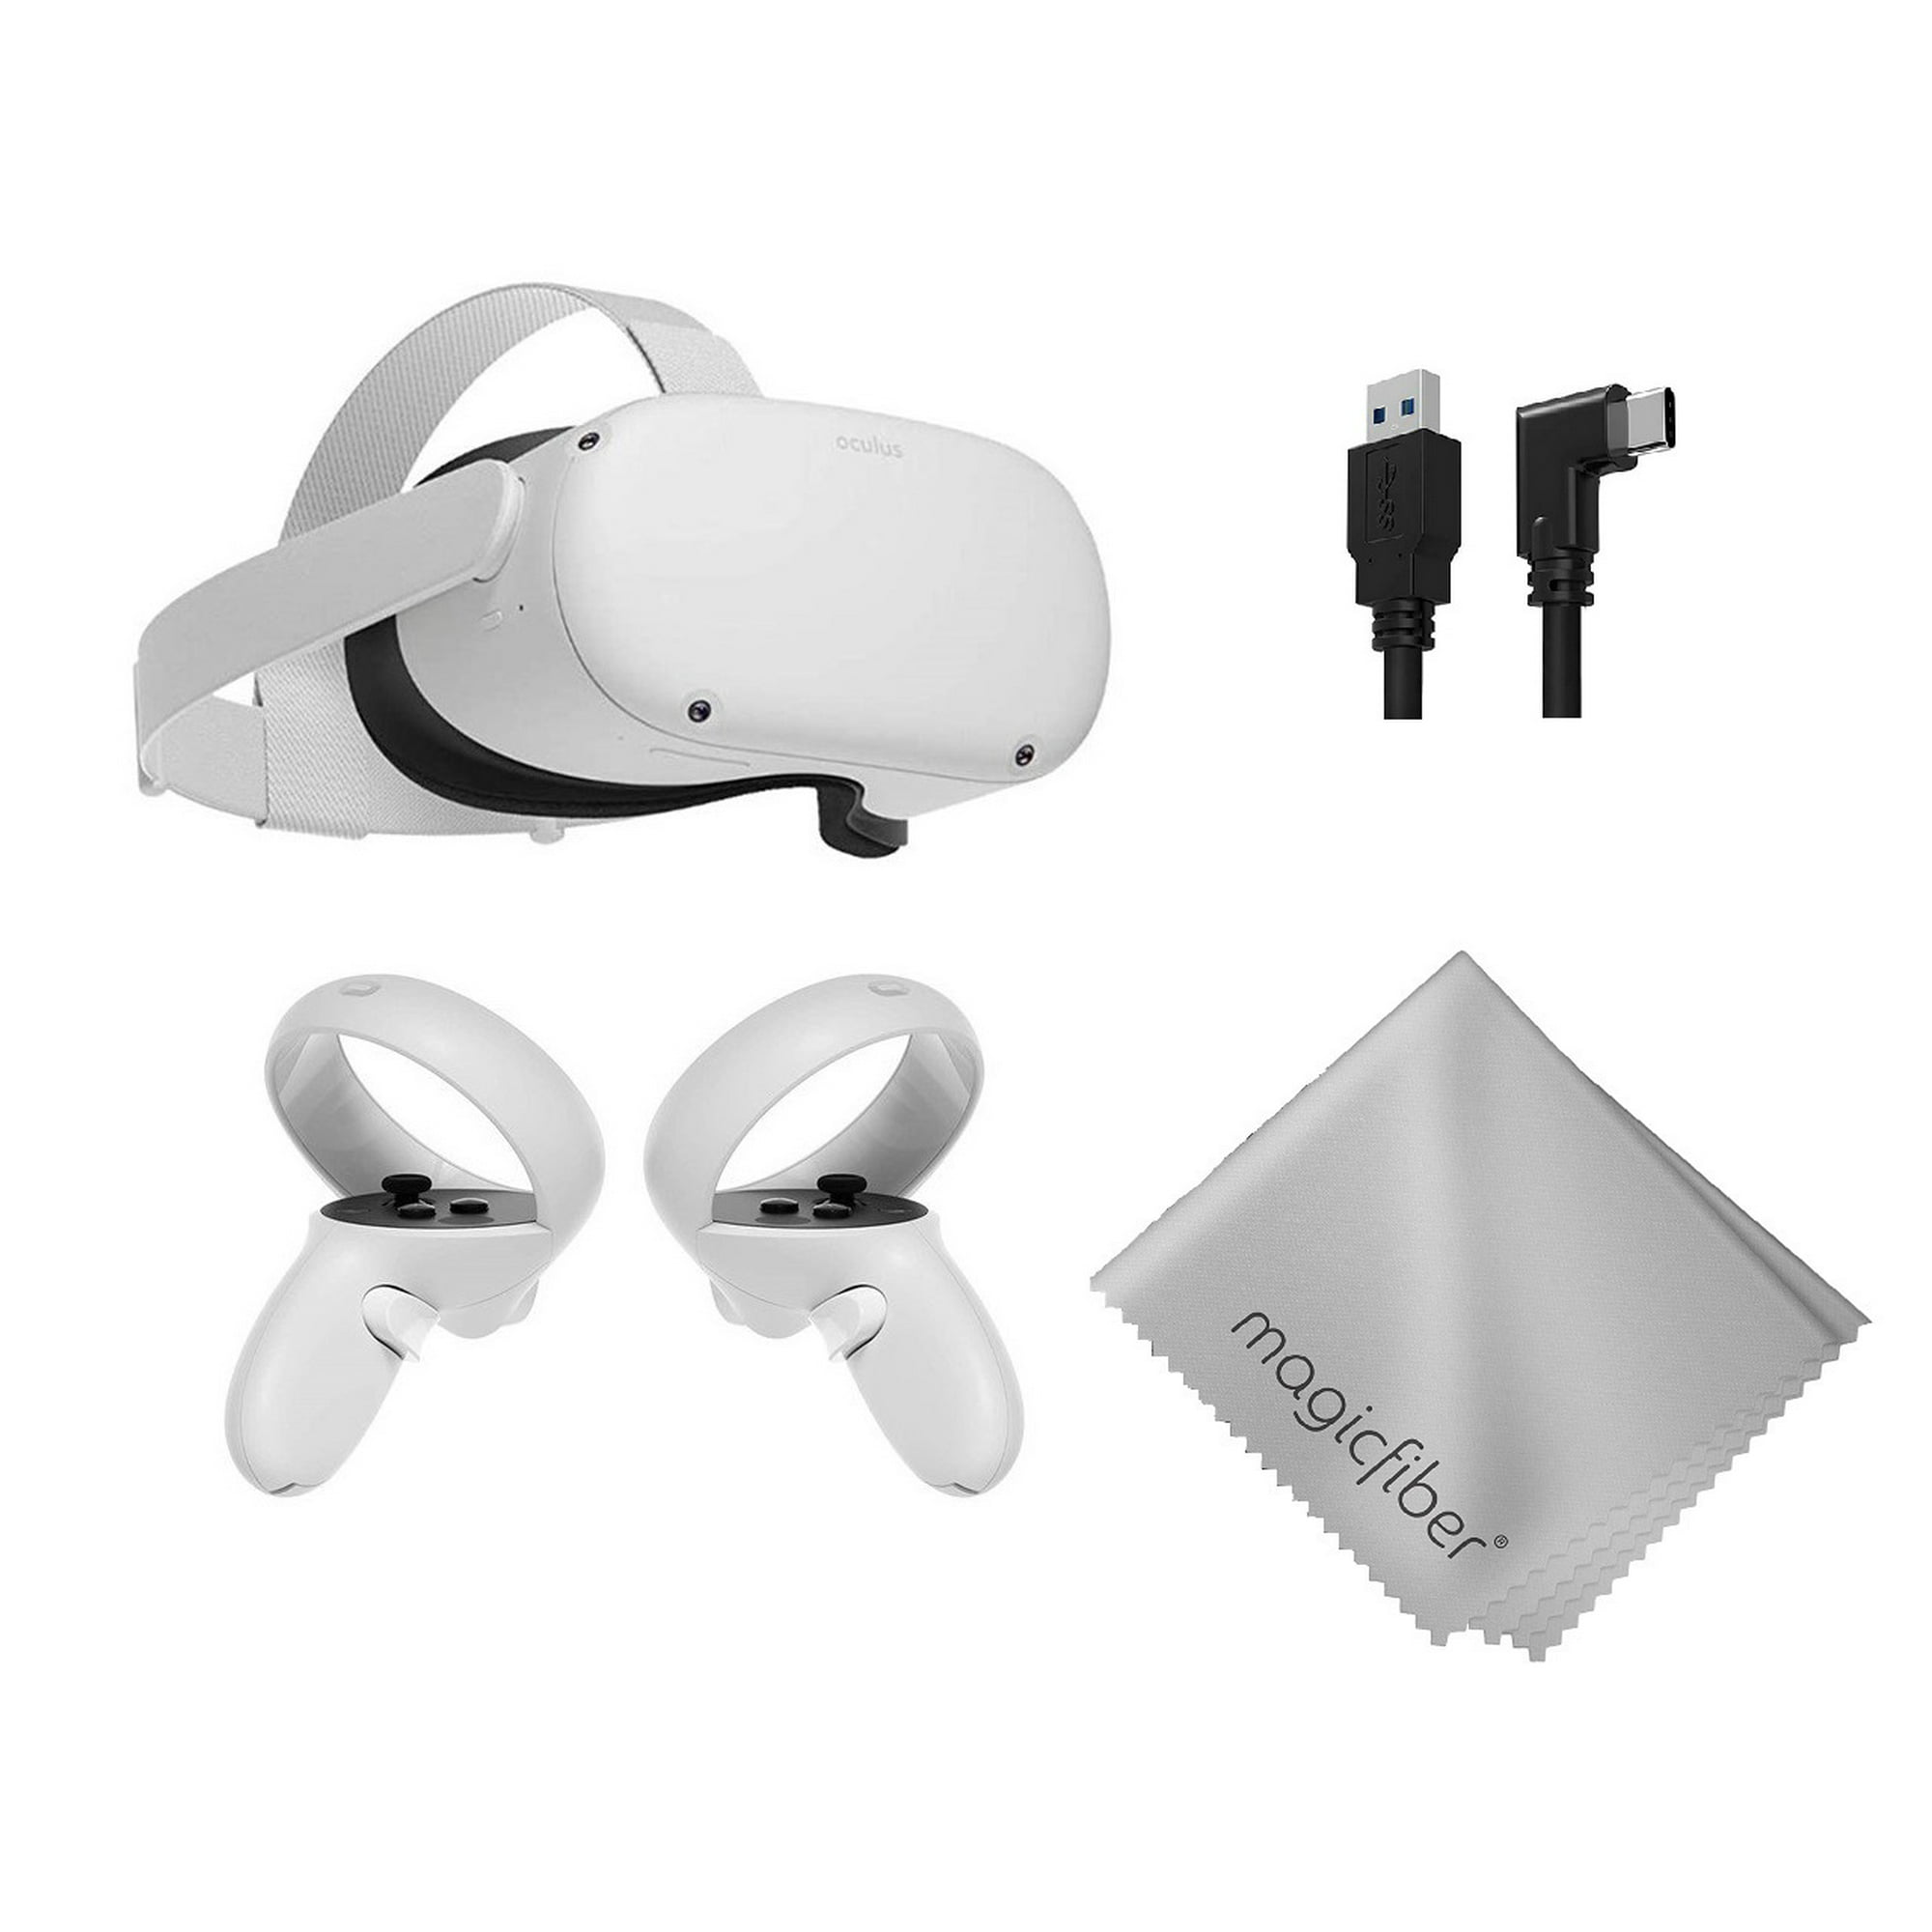 2021 Oculus Quest 2 All-In-One VR Headset, Touch Controllers, 64GB